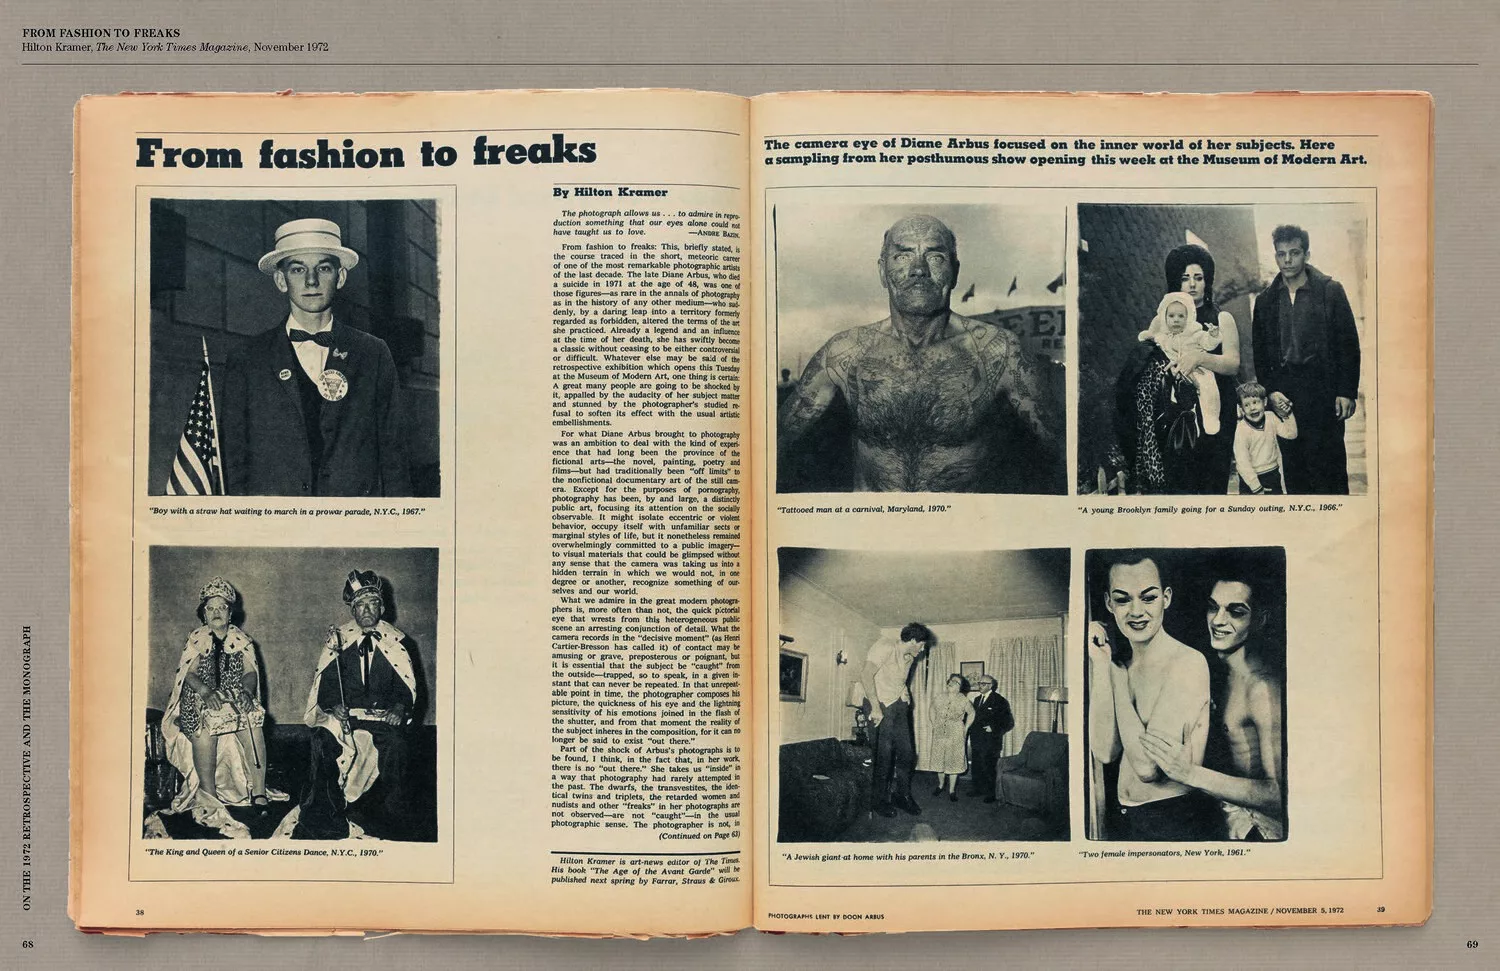 internal layout of Diane Arbus Photographs - from fashion to freaks and essays by art critics